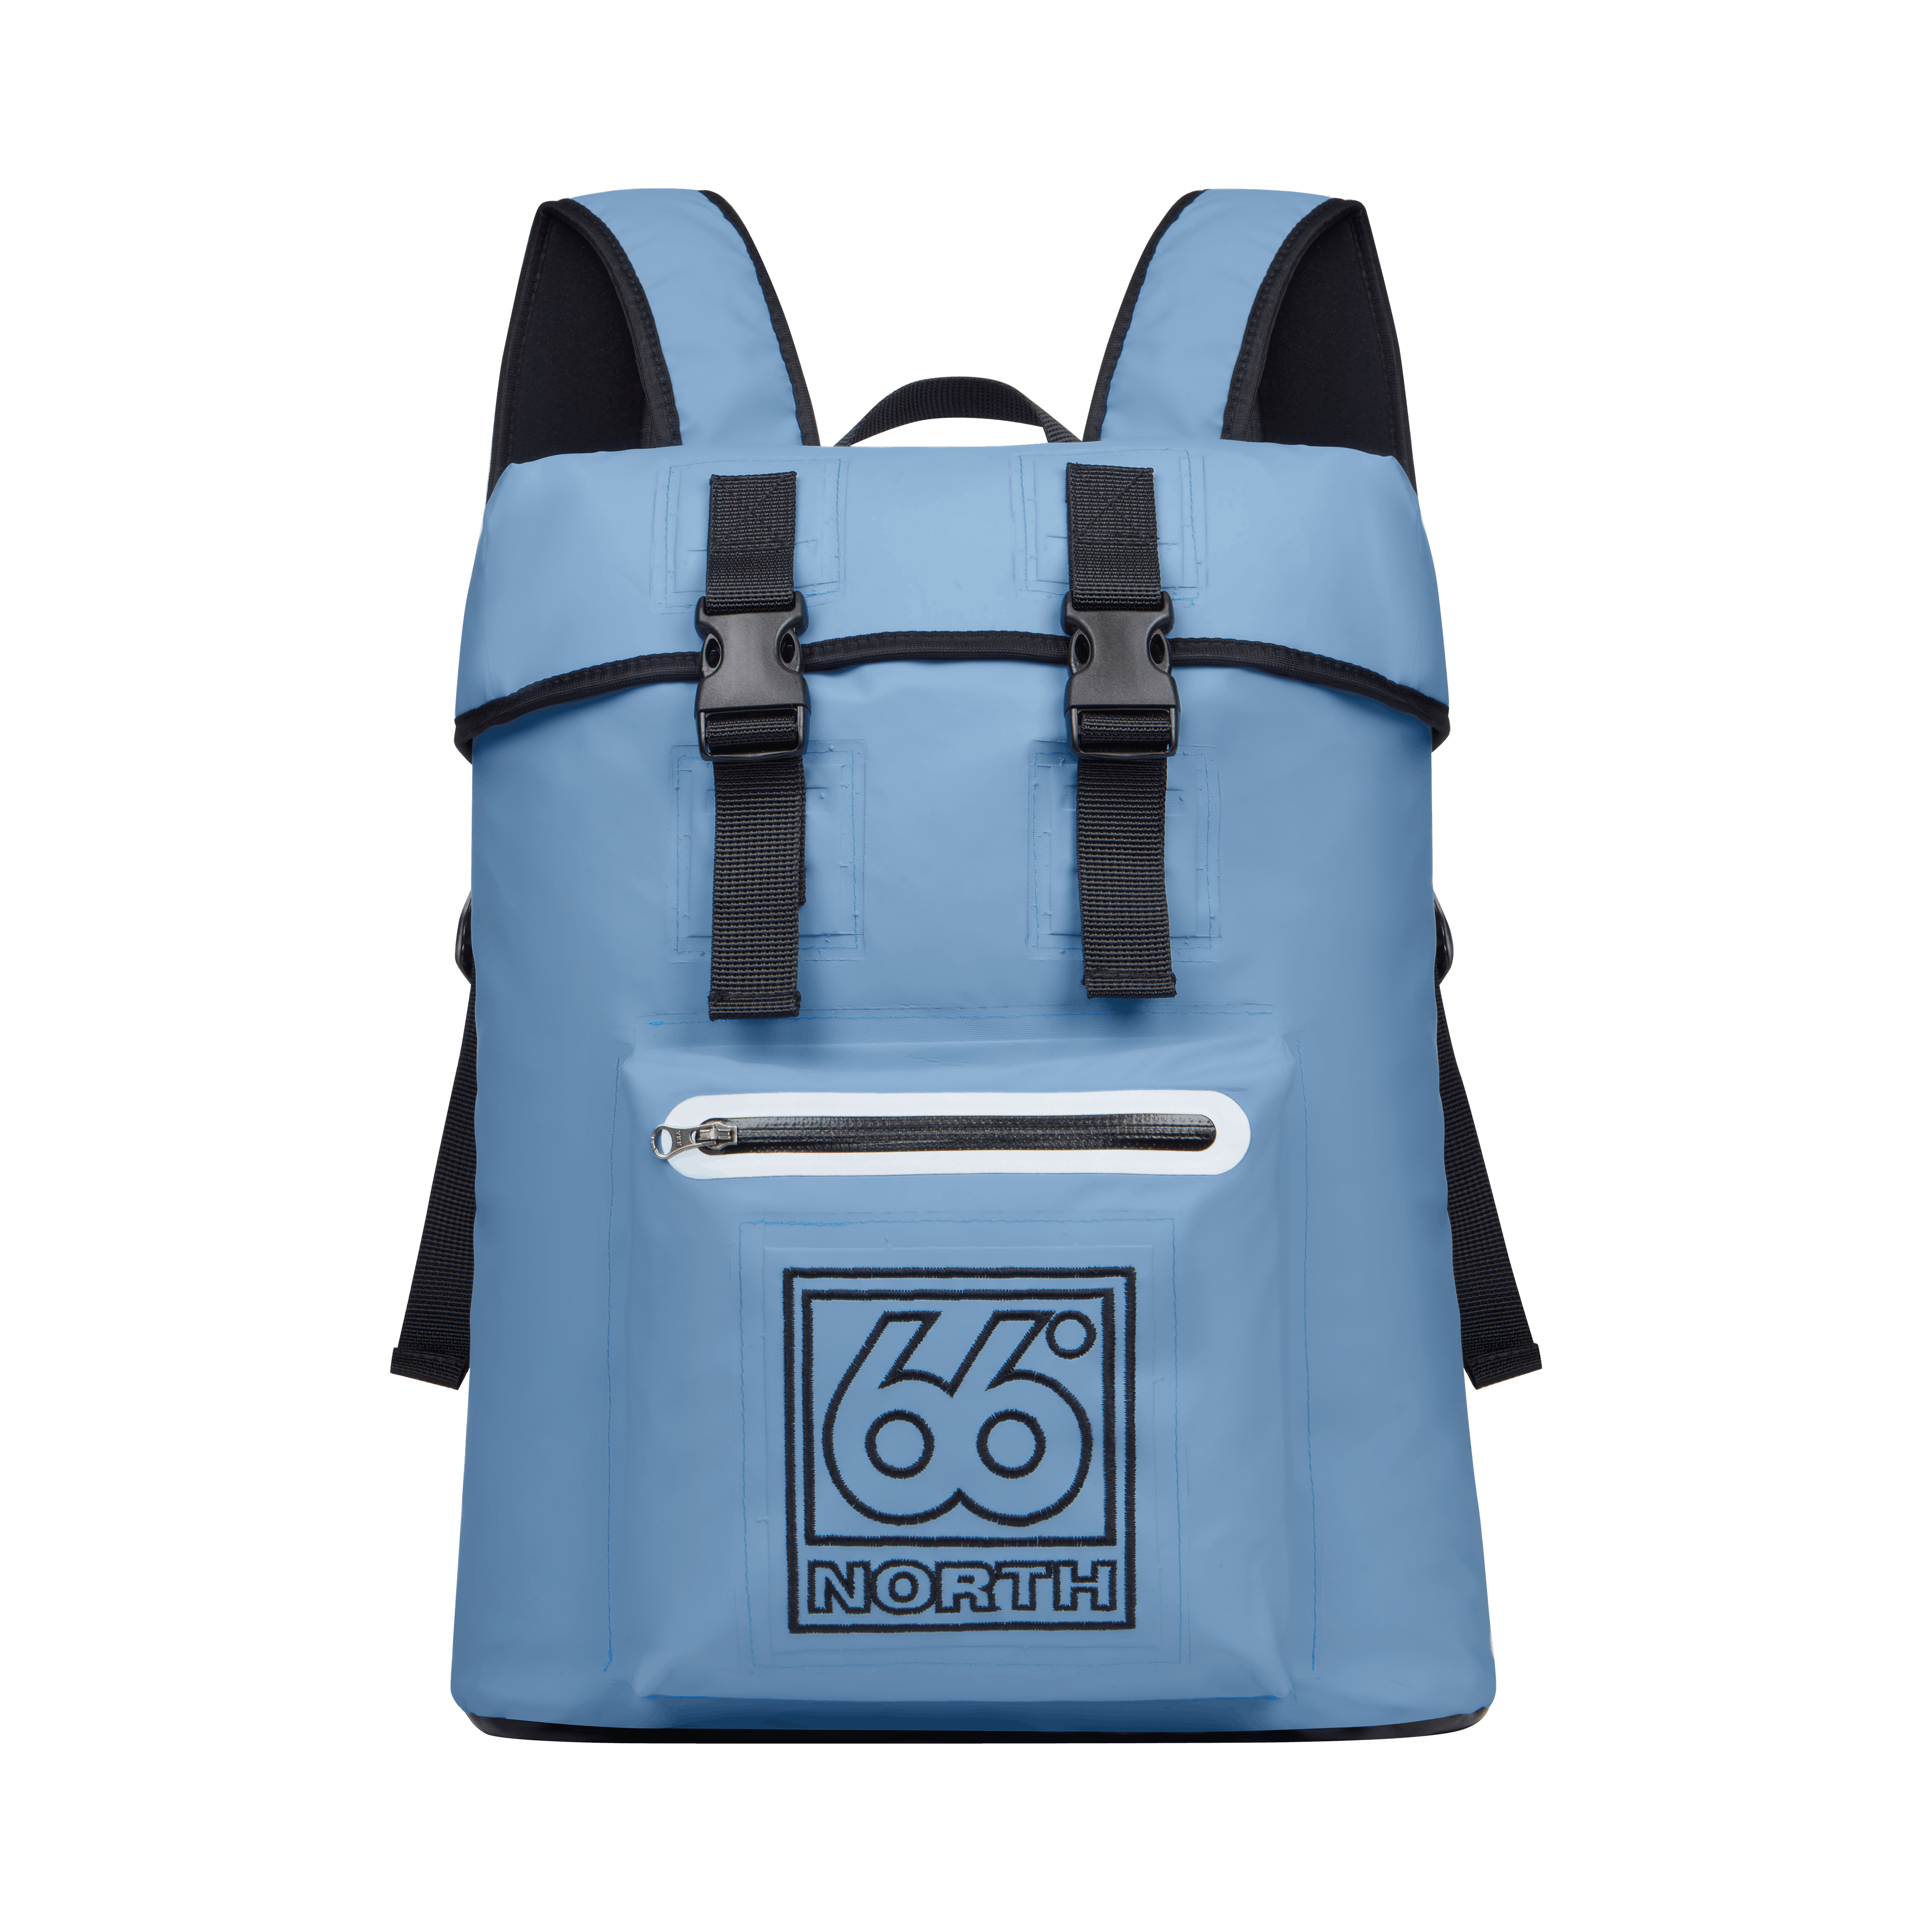 66 North Women's Backpack Accessories - Faded Blue - One Size